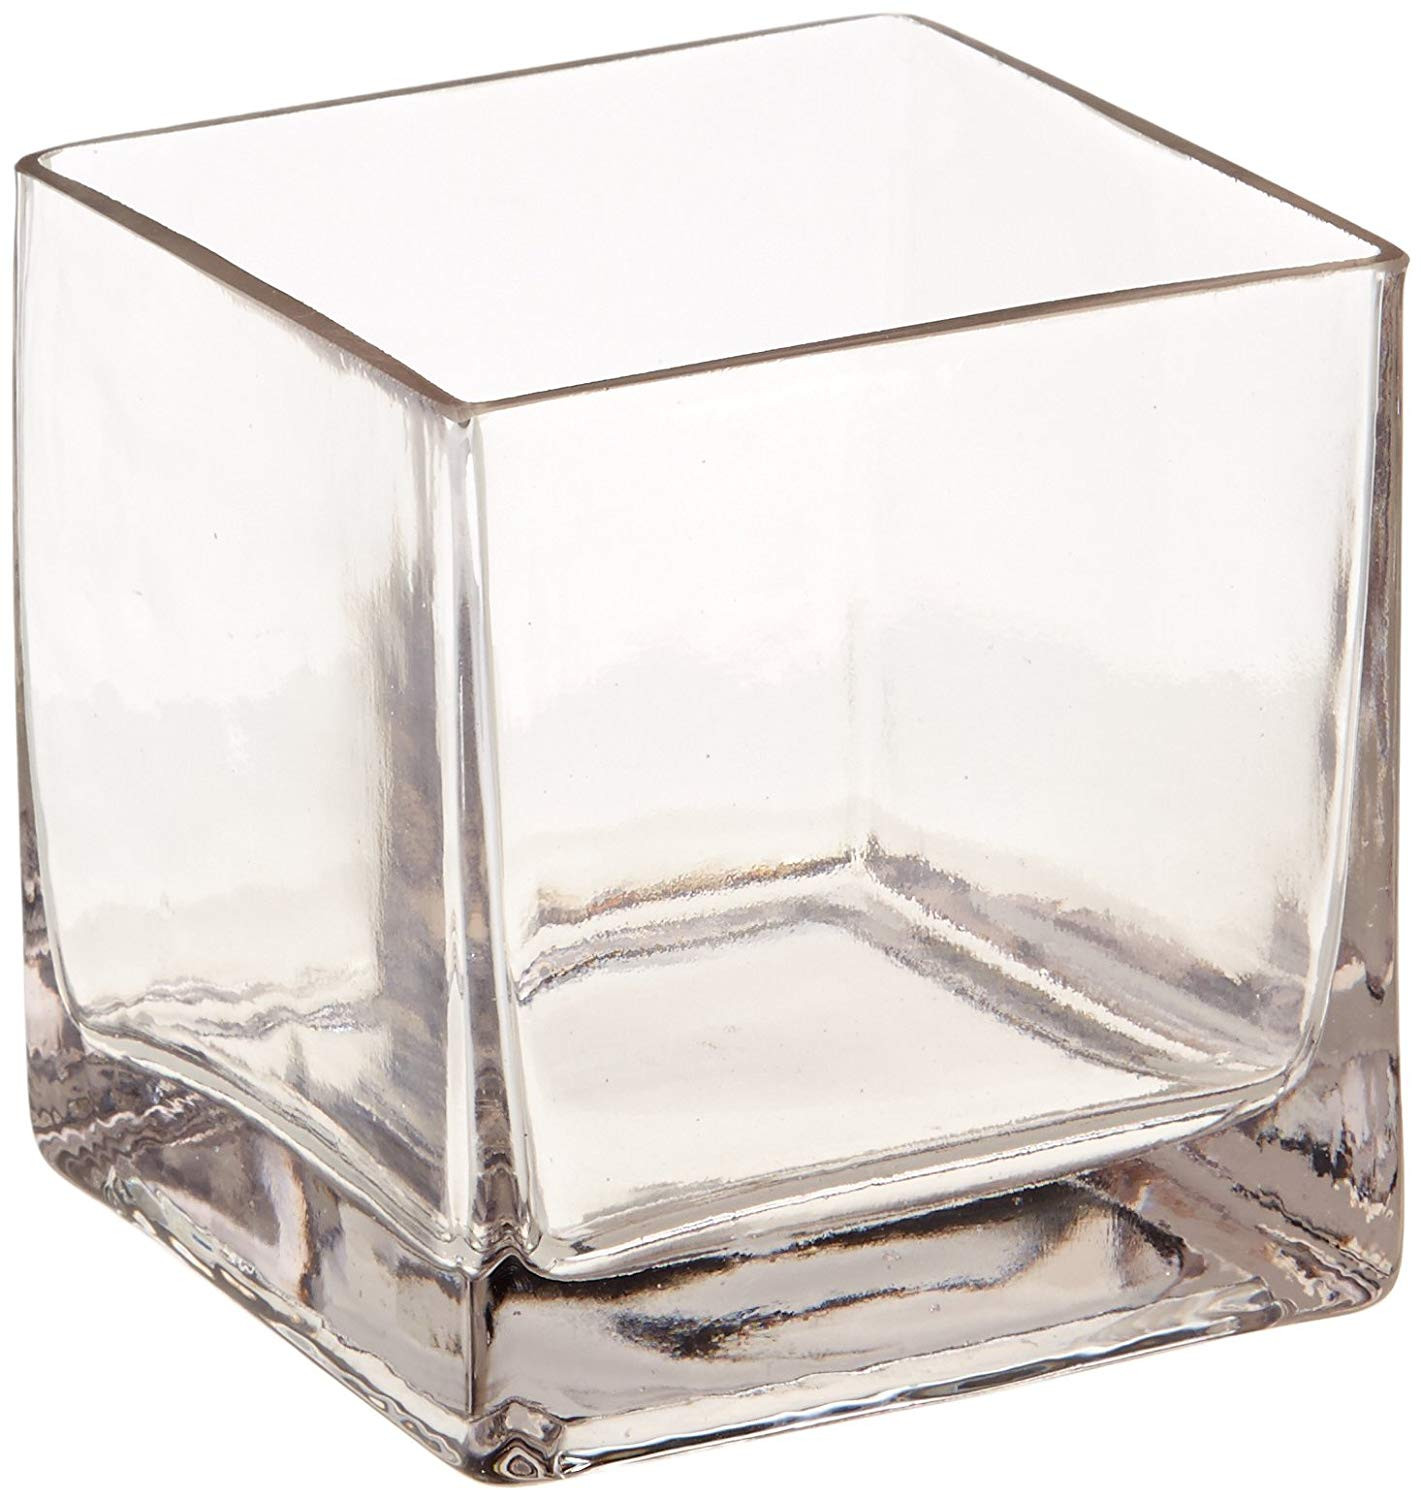 13 Fantastic Waterford Crystal Flower Vase 2024 free download waterford crystal flower vase of amazon com 12piece 4 square crystal clear glass vase home kitchen pertaining to 71 jezfmvnl sl1500